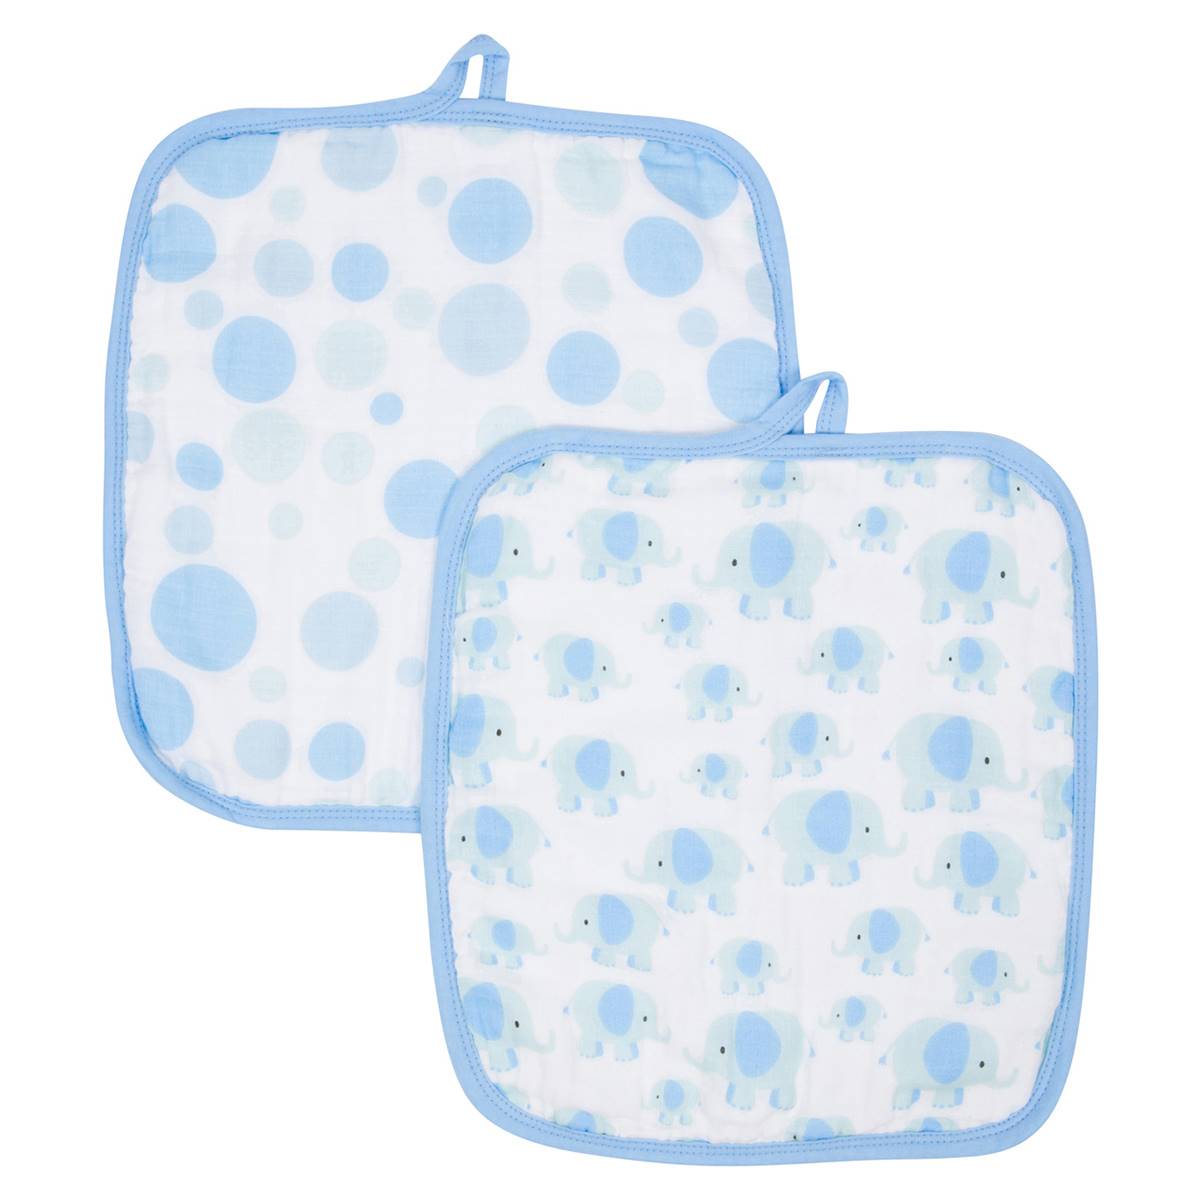 MiracleWare(R) 2-Pack Elephant & Dot Washcloths